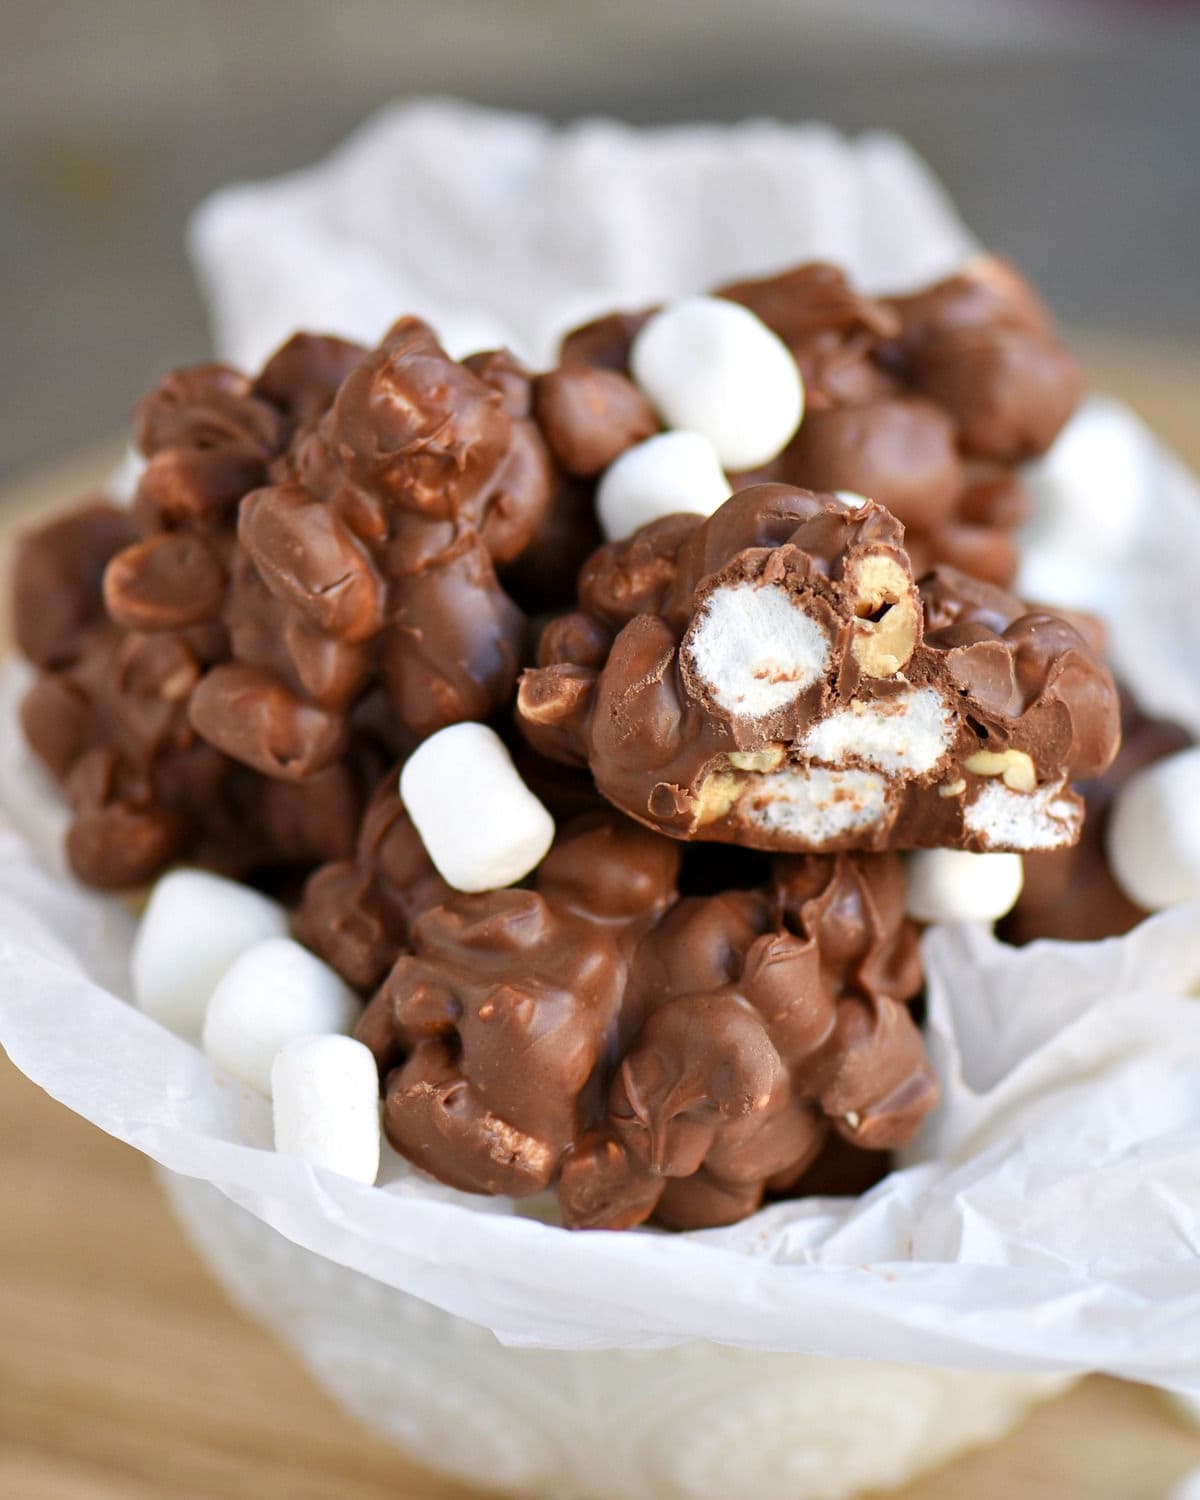 white bowl full of rocky road peanut clusters with one cut in half. marhsmallows are scattered on top.